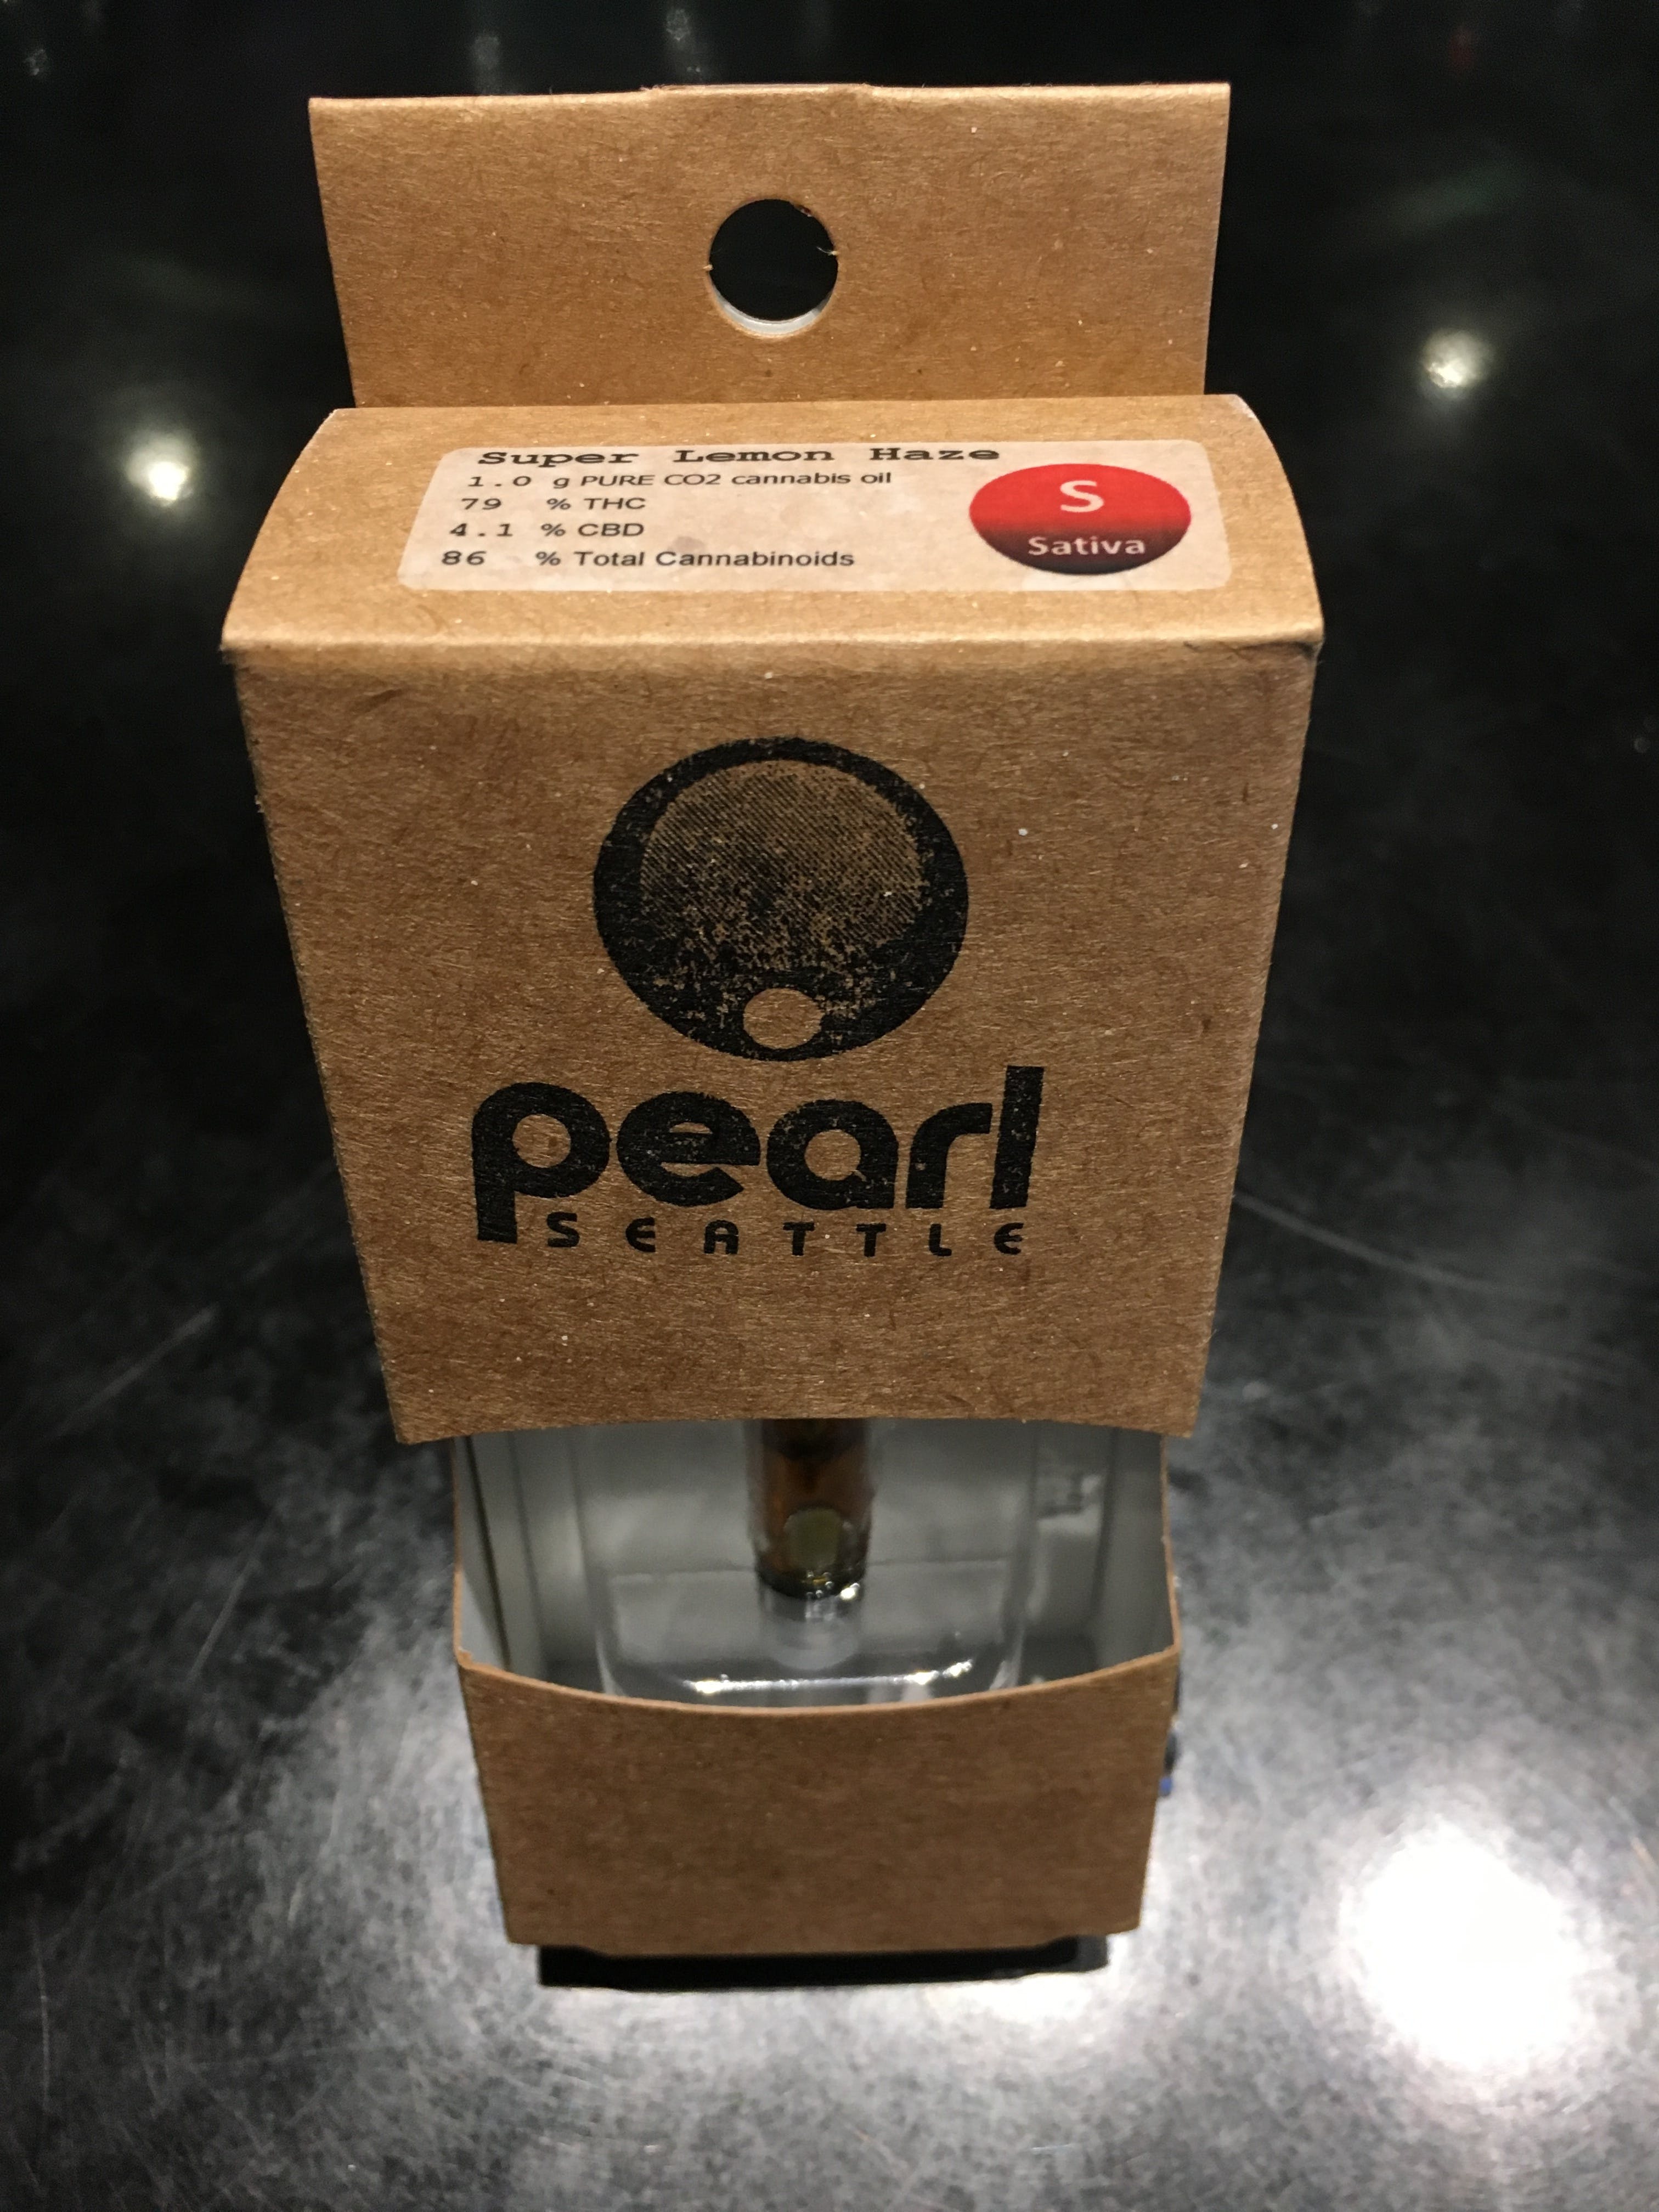 concentrate-super-lemon-haze-clear-cartridge-by-pearl-extracts